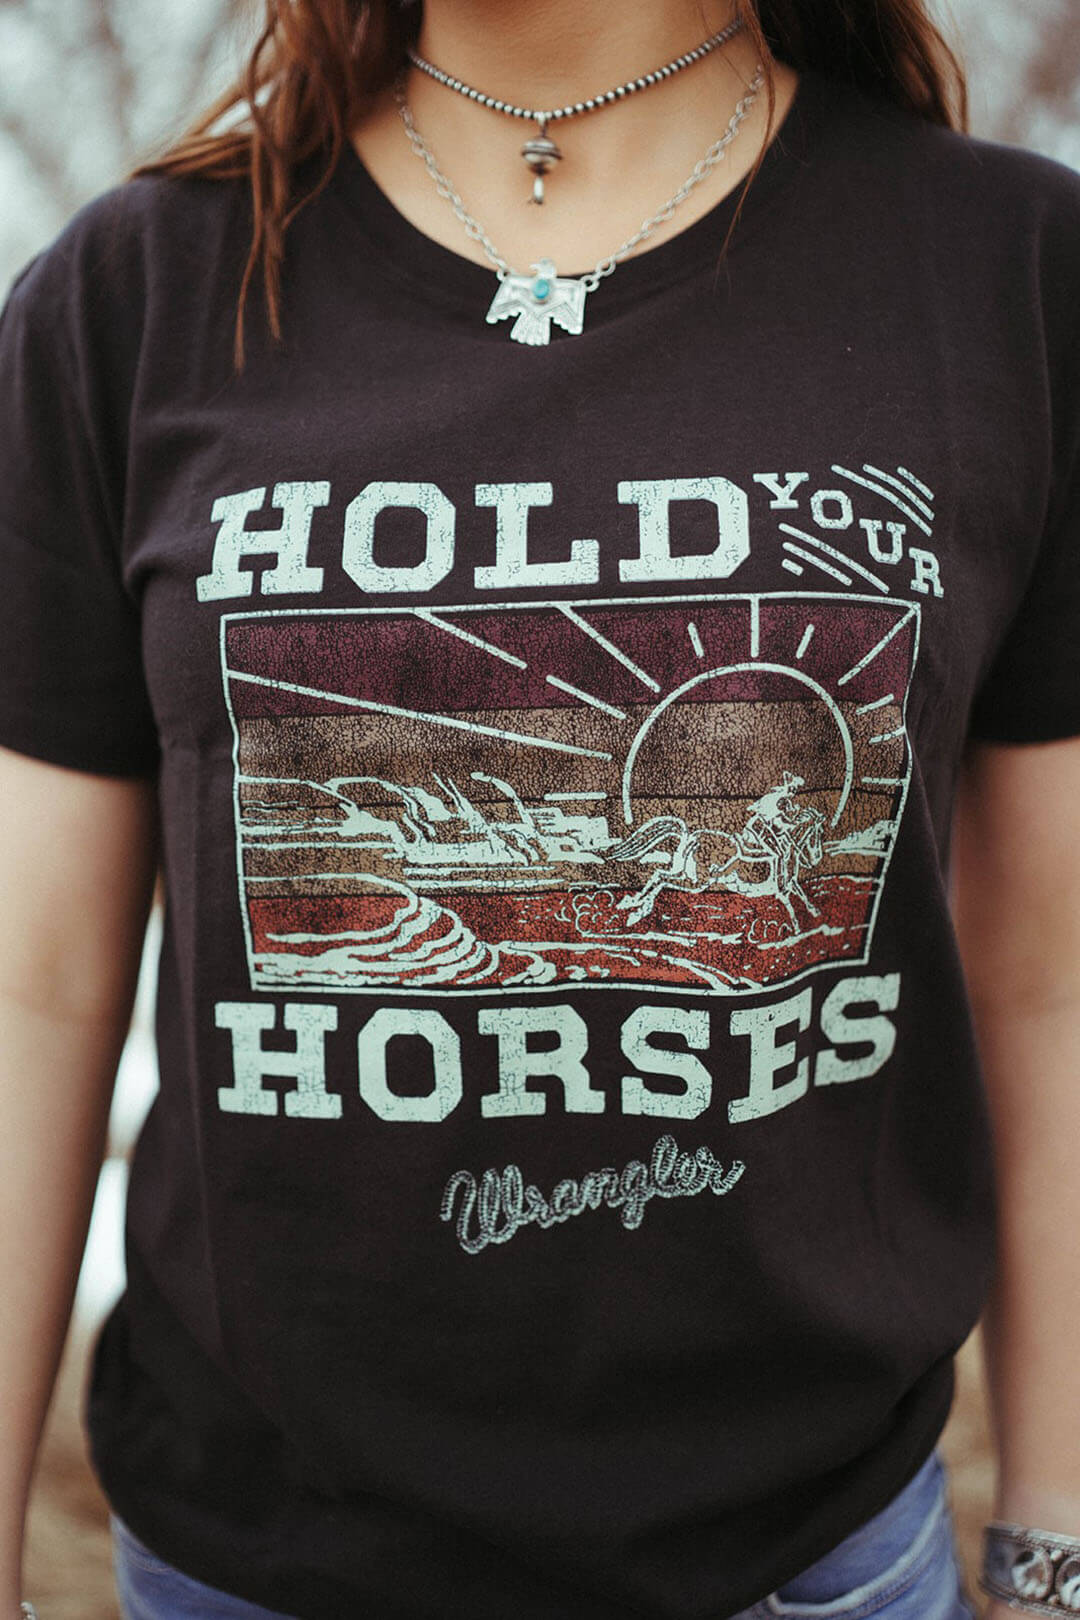 Woman modeling the "Hold Your Horses" graphic tee.  The shirt is black in color with a colorful western scene of a cowboy riding along side of the sun.